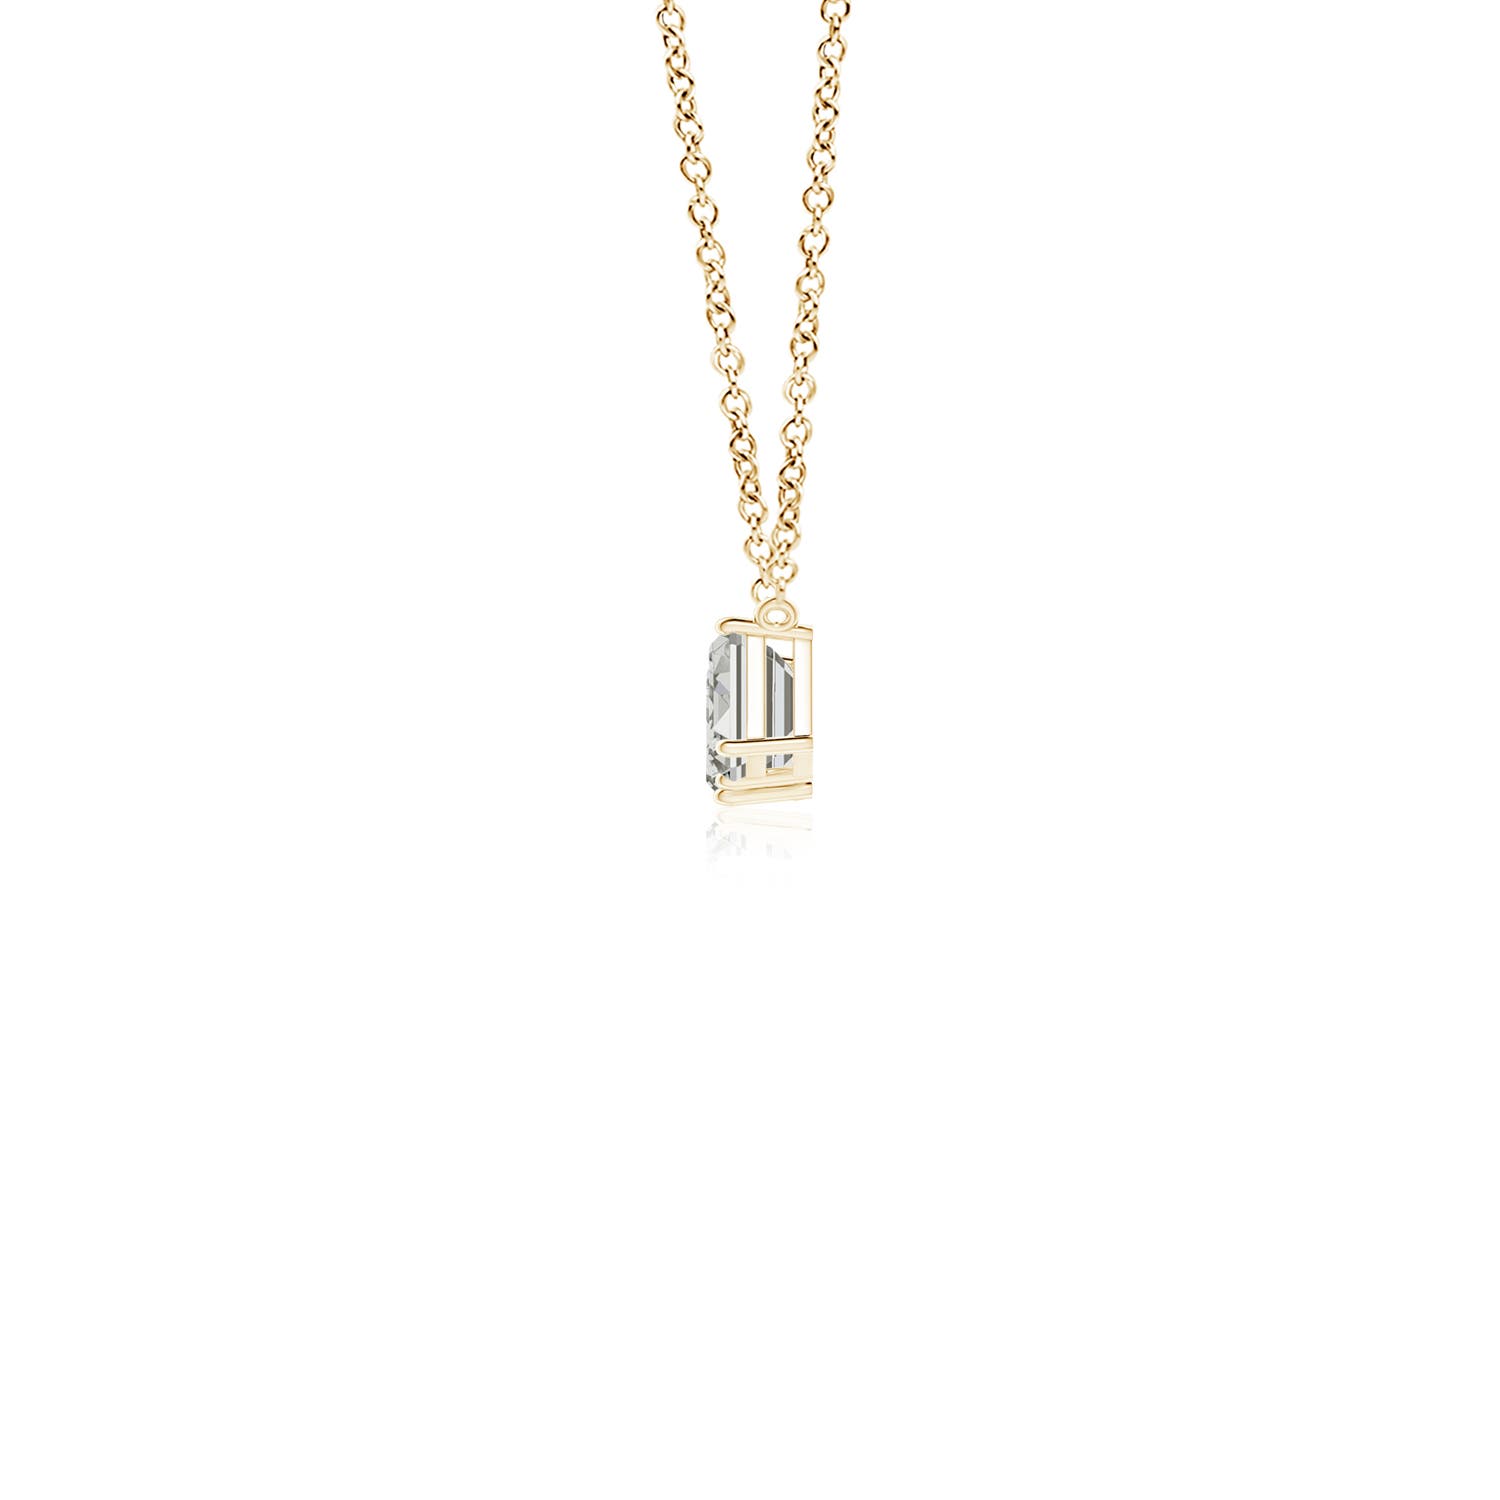 K, I3 / 1.12 CT / 18 KT Yellow Gold